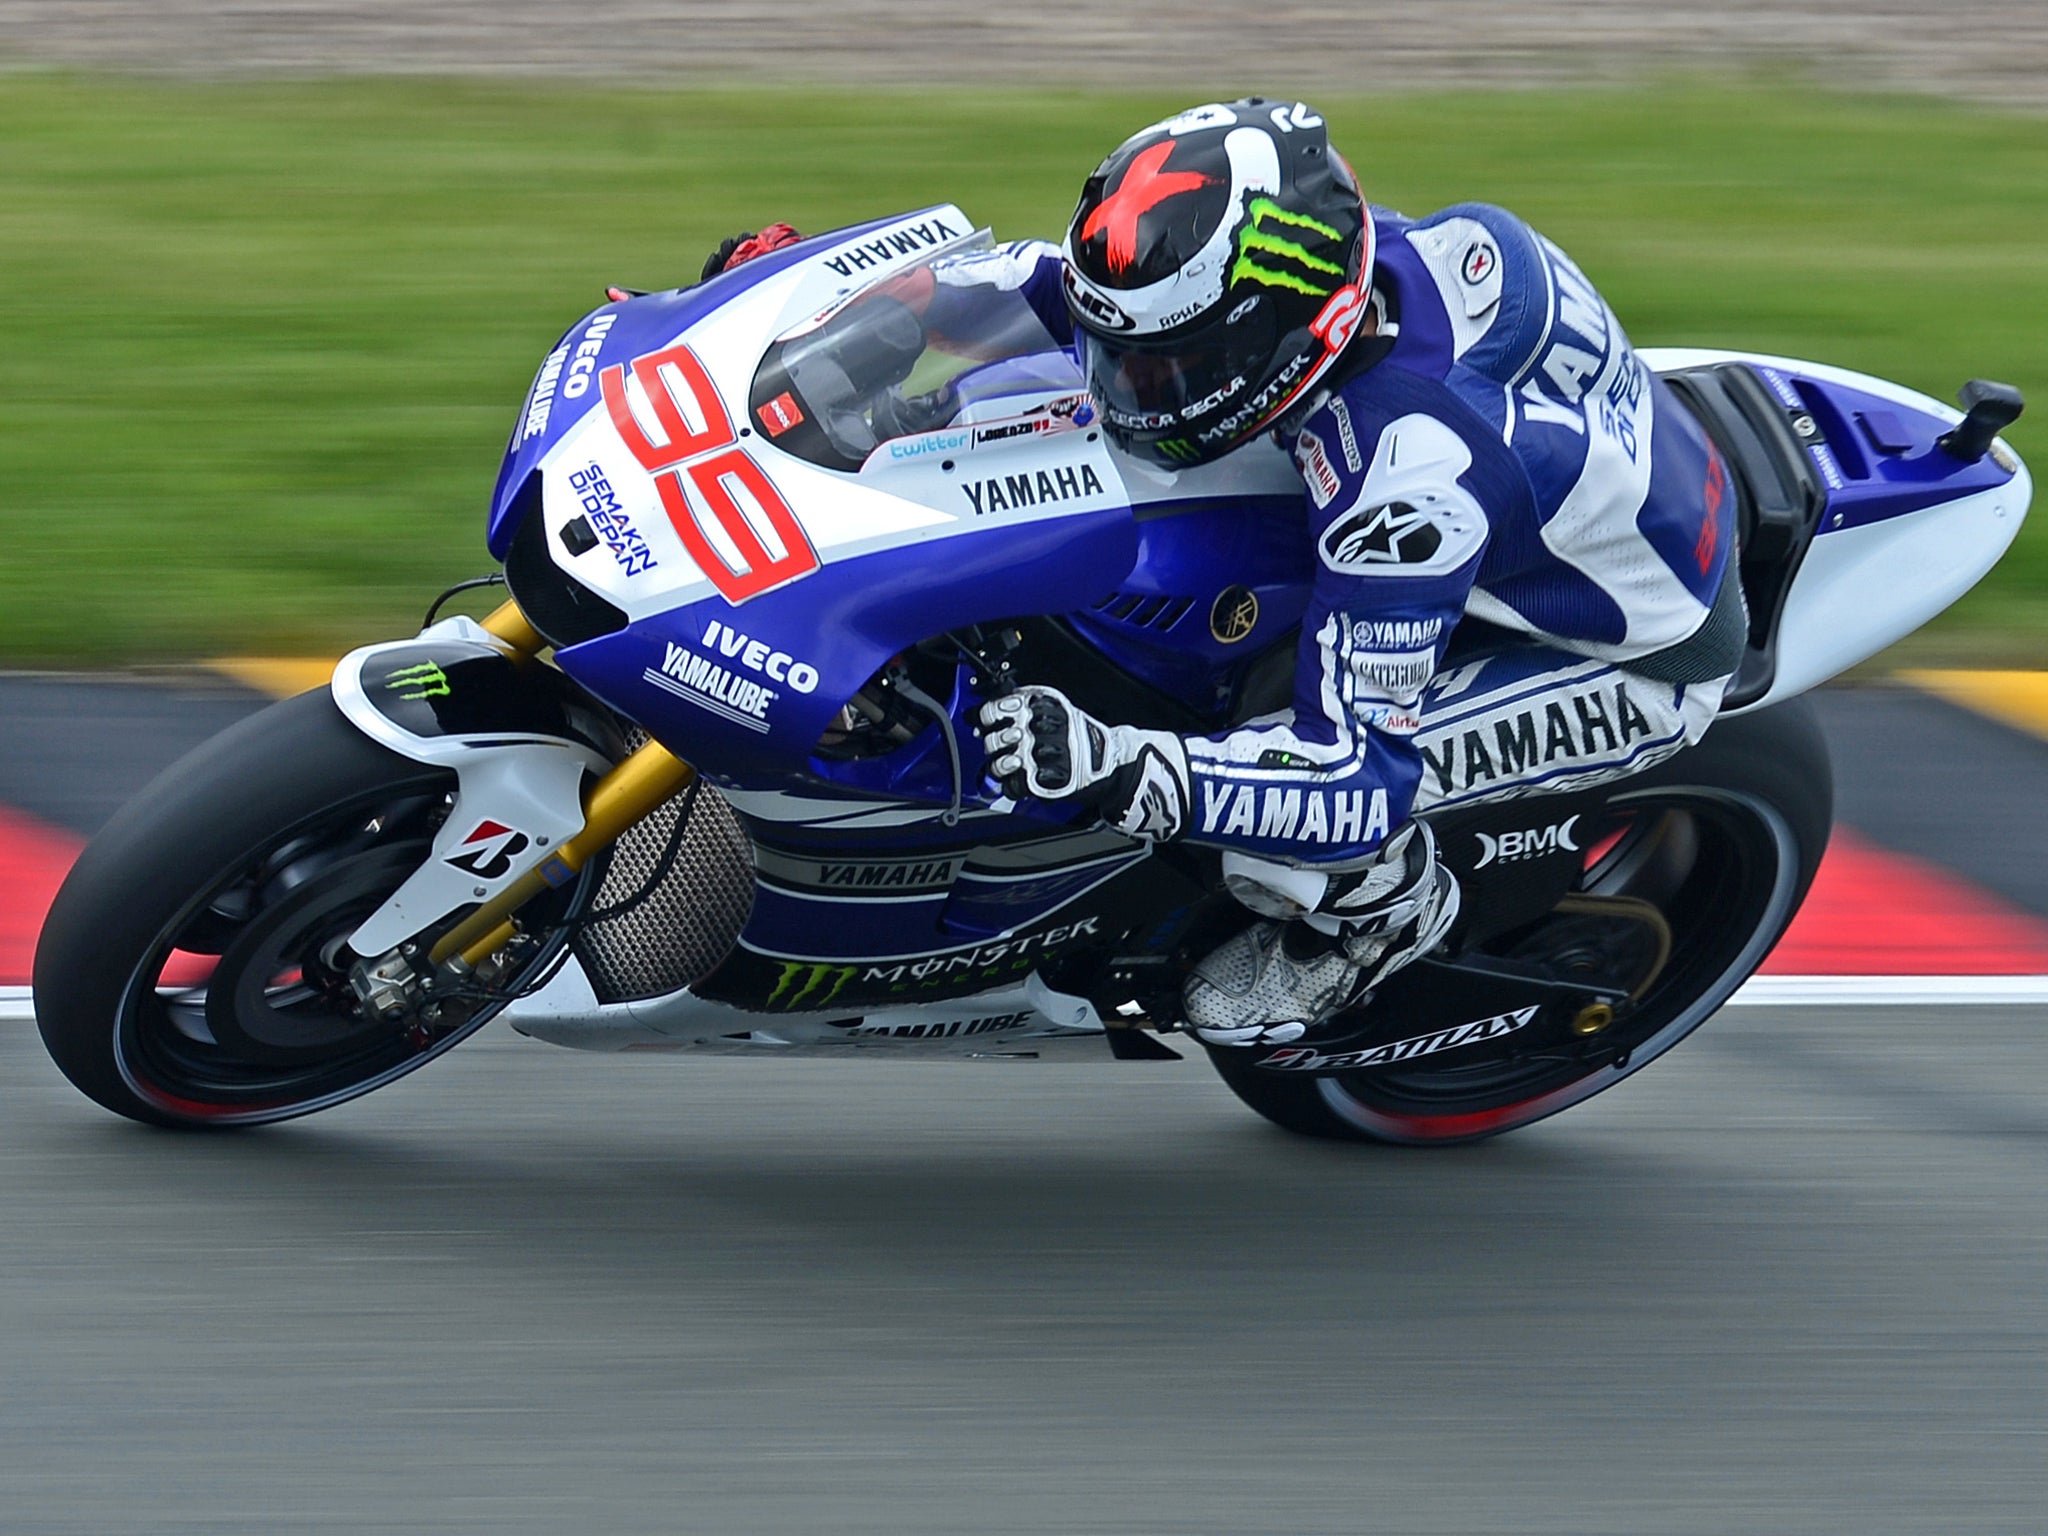 Jorge Lorenzo in action at the Sachsenring before he suffered his crash